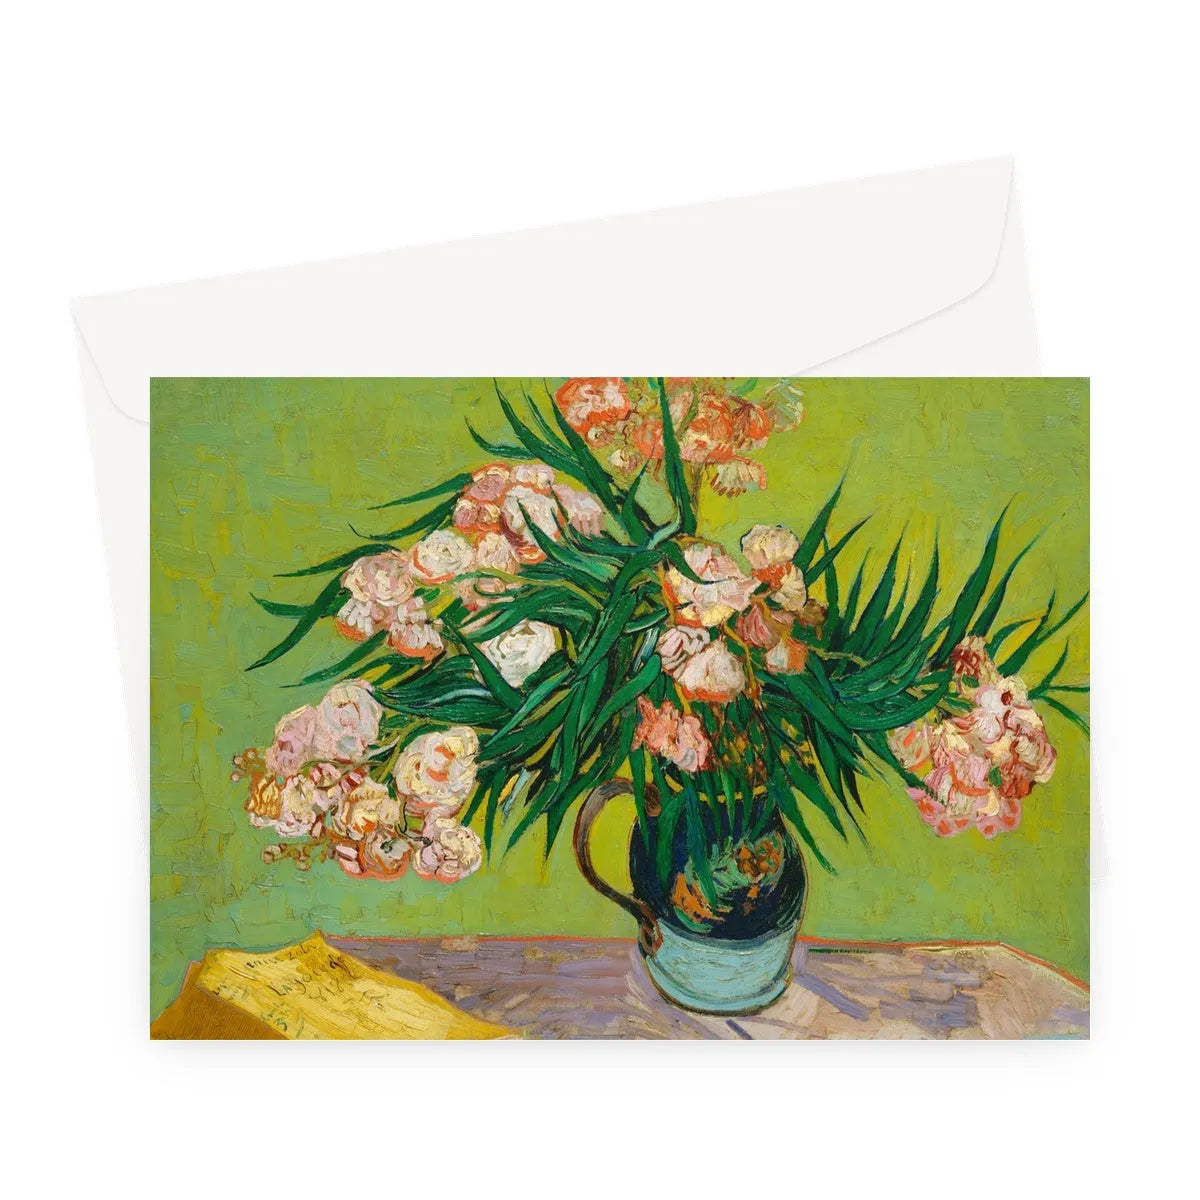 Oleanders By Vincent Van Gogh Greeting Card - A5 Landscape / 1 Card - Notebooks & Notepads - Aesthetic Art